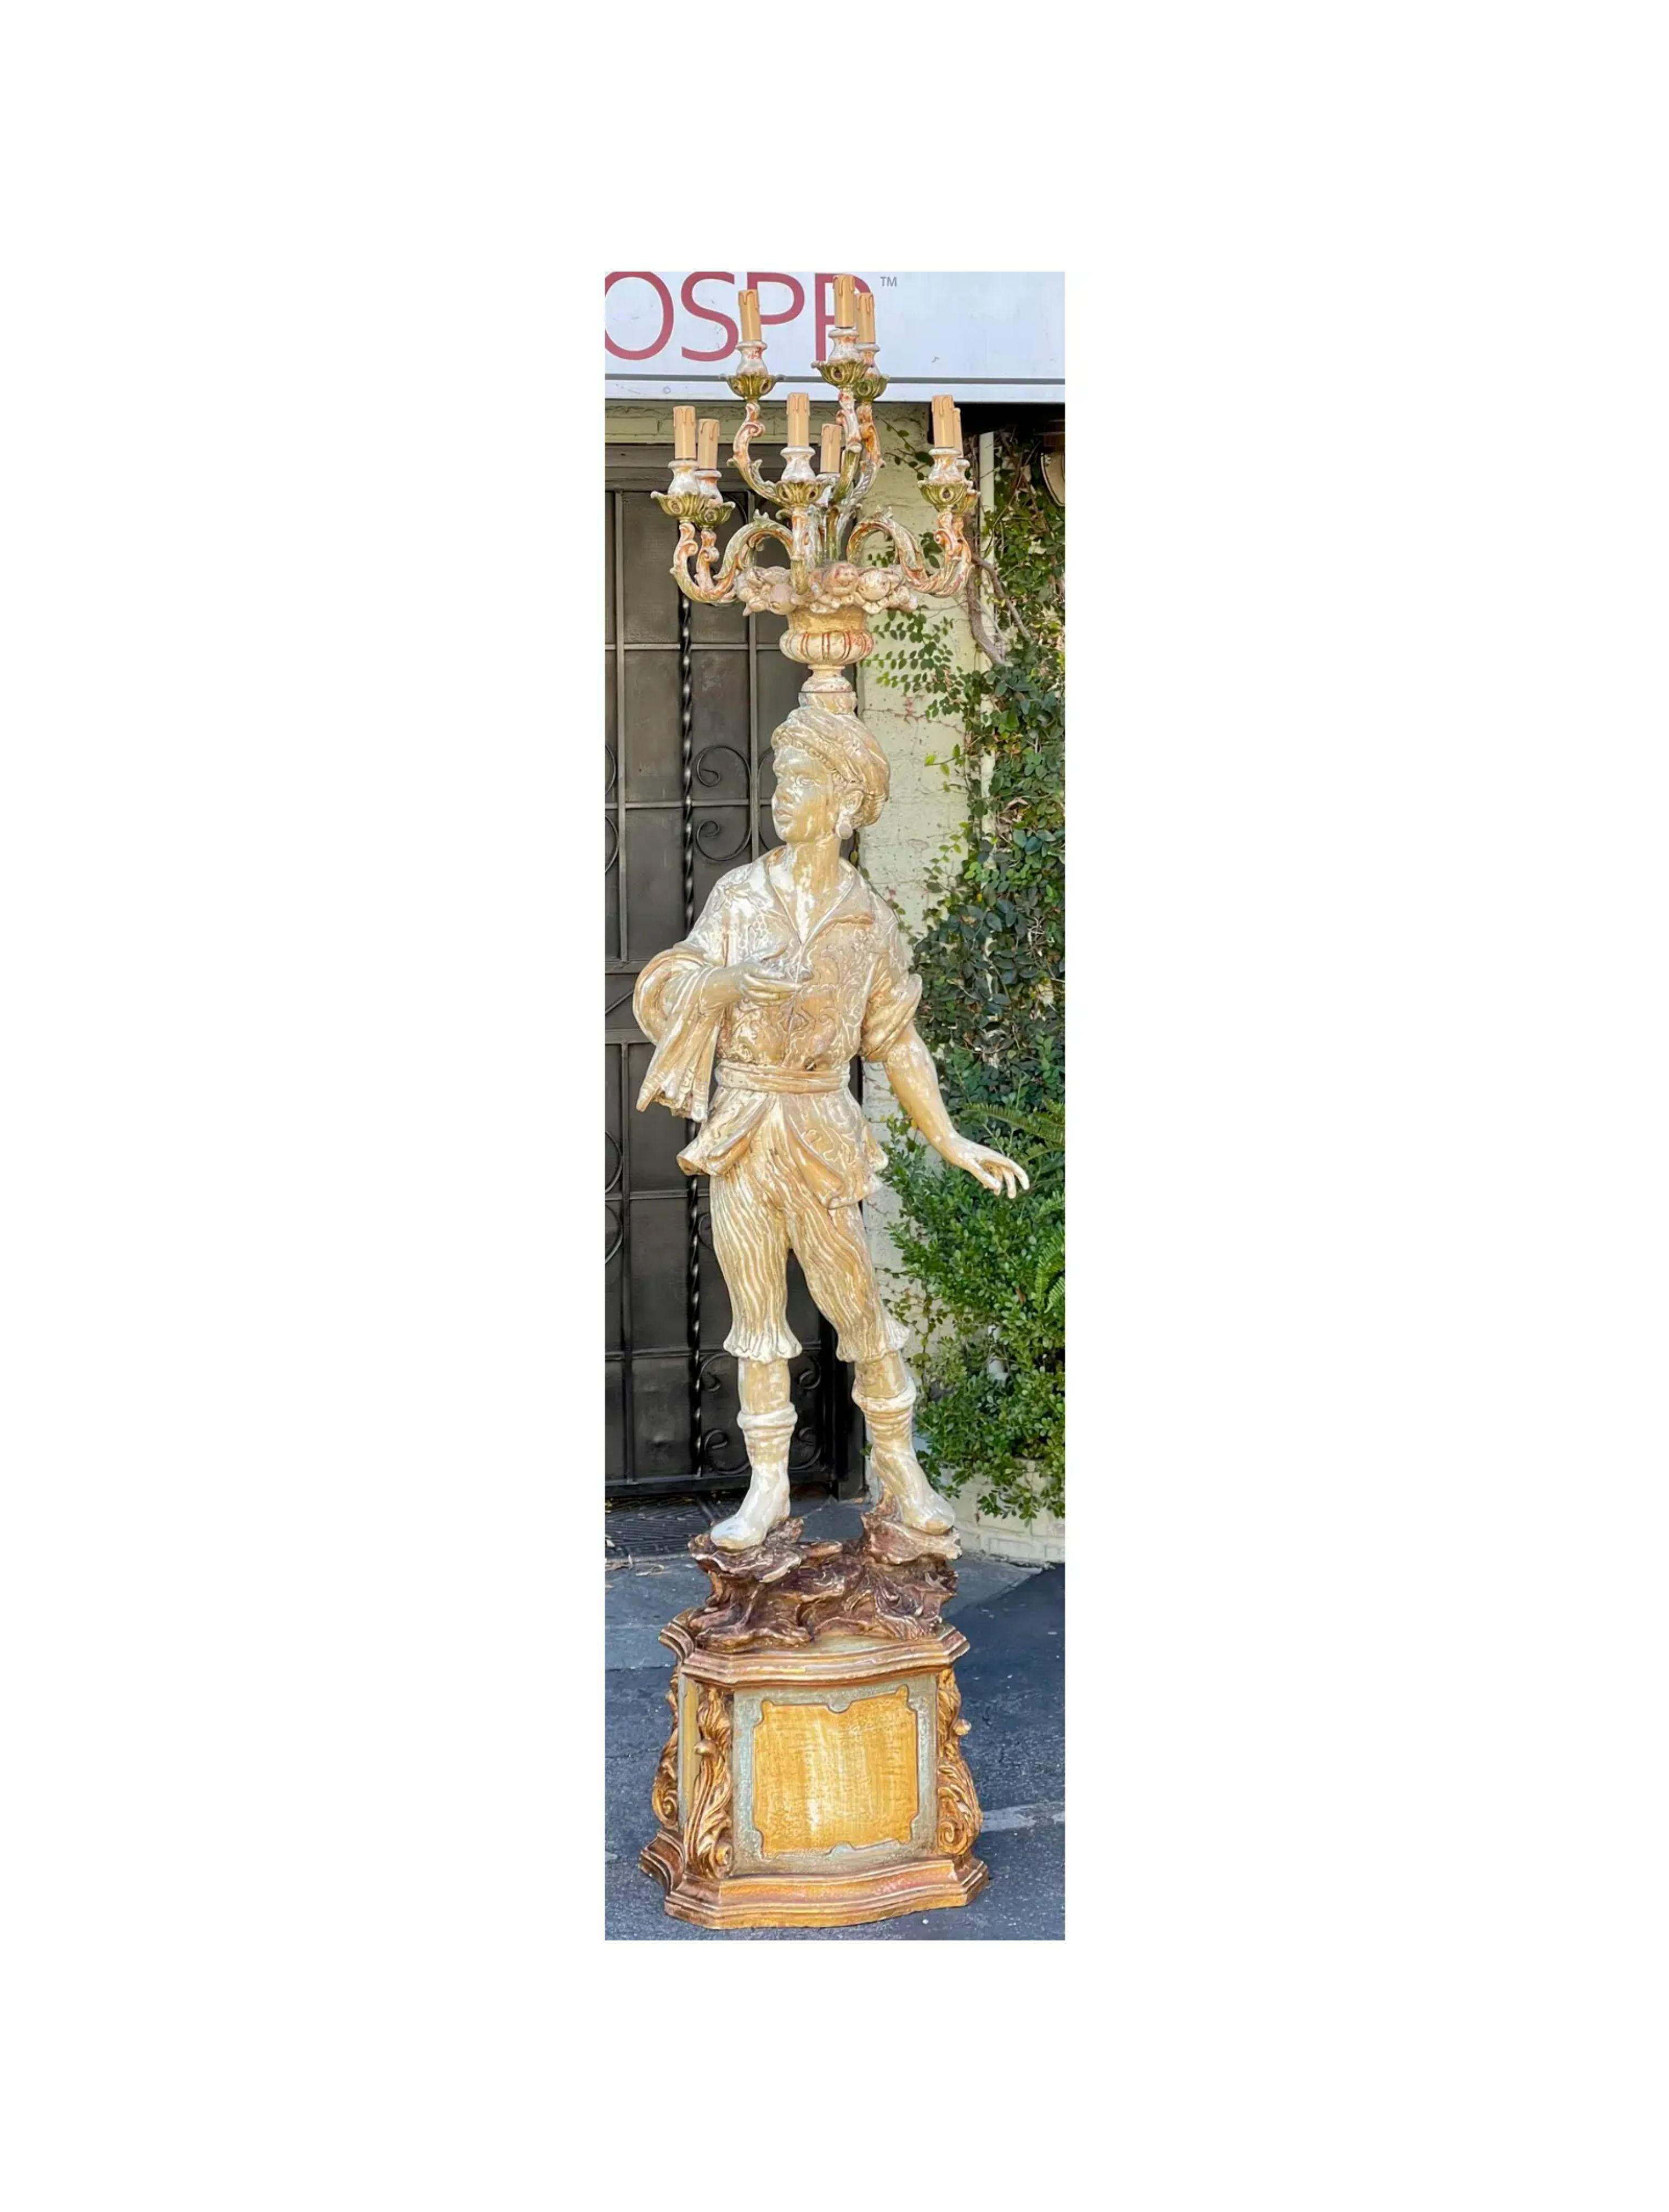 Antique Italian Figural standing candelabra floor lamp. It features a standing figure on a plinth with a candelabra stemming from his head.

Additional information: 
Materials: Lights, Wood
Color: Beige
Period: Early 20th Century
Styles: